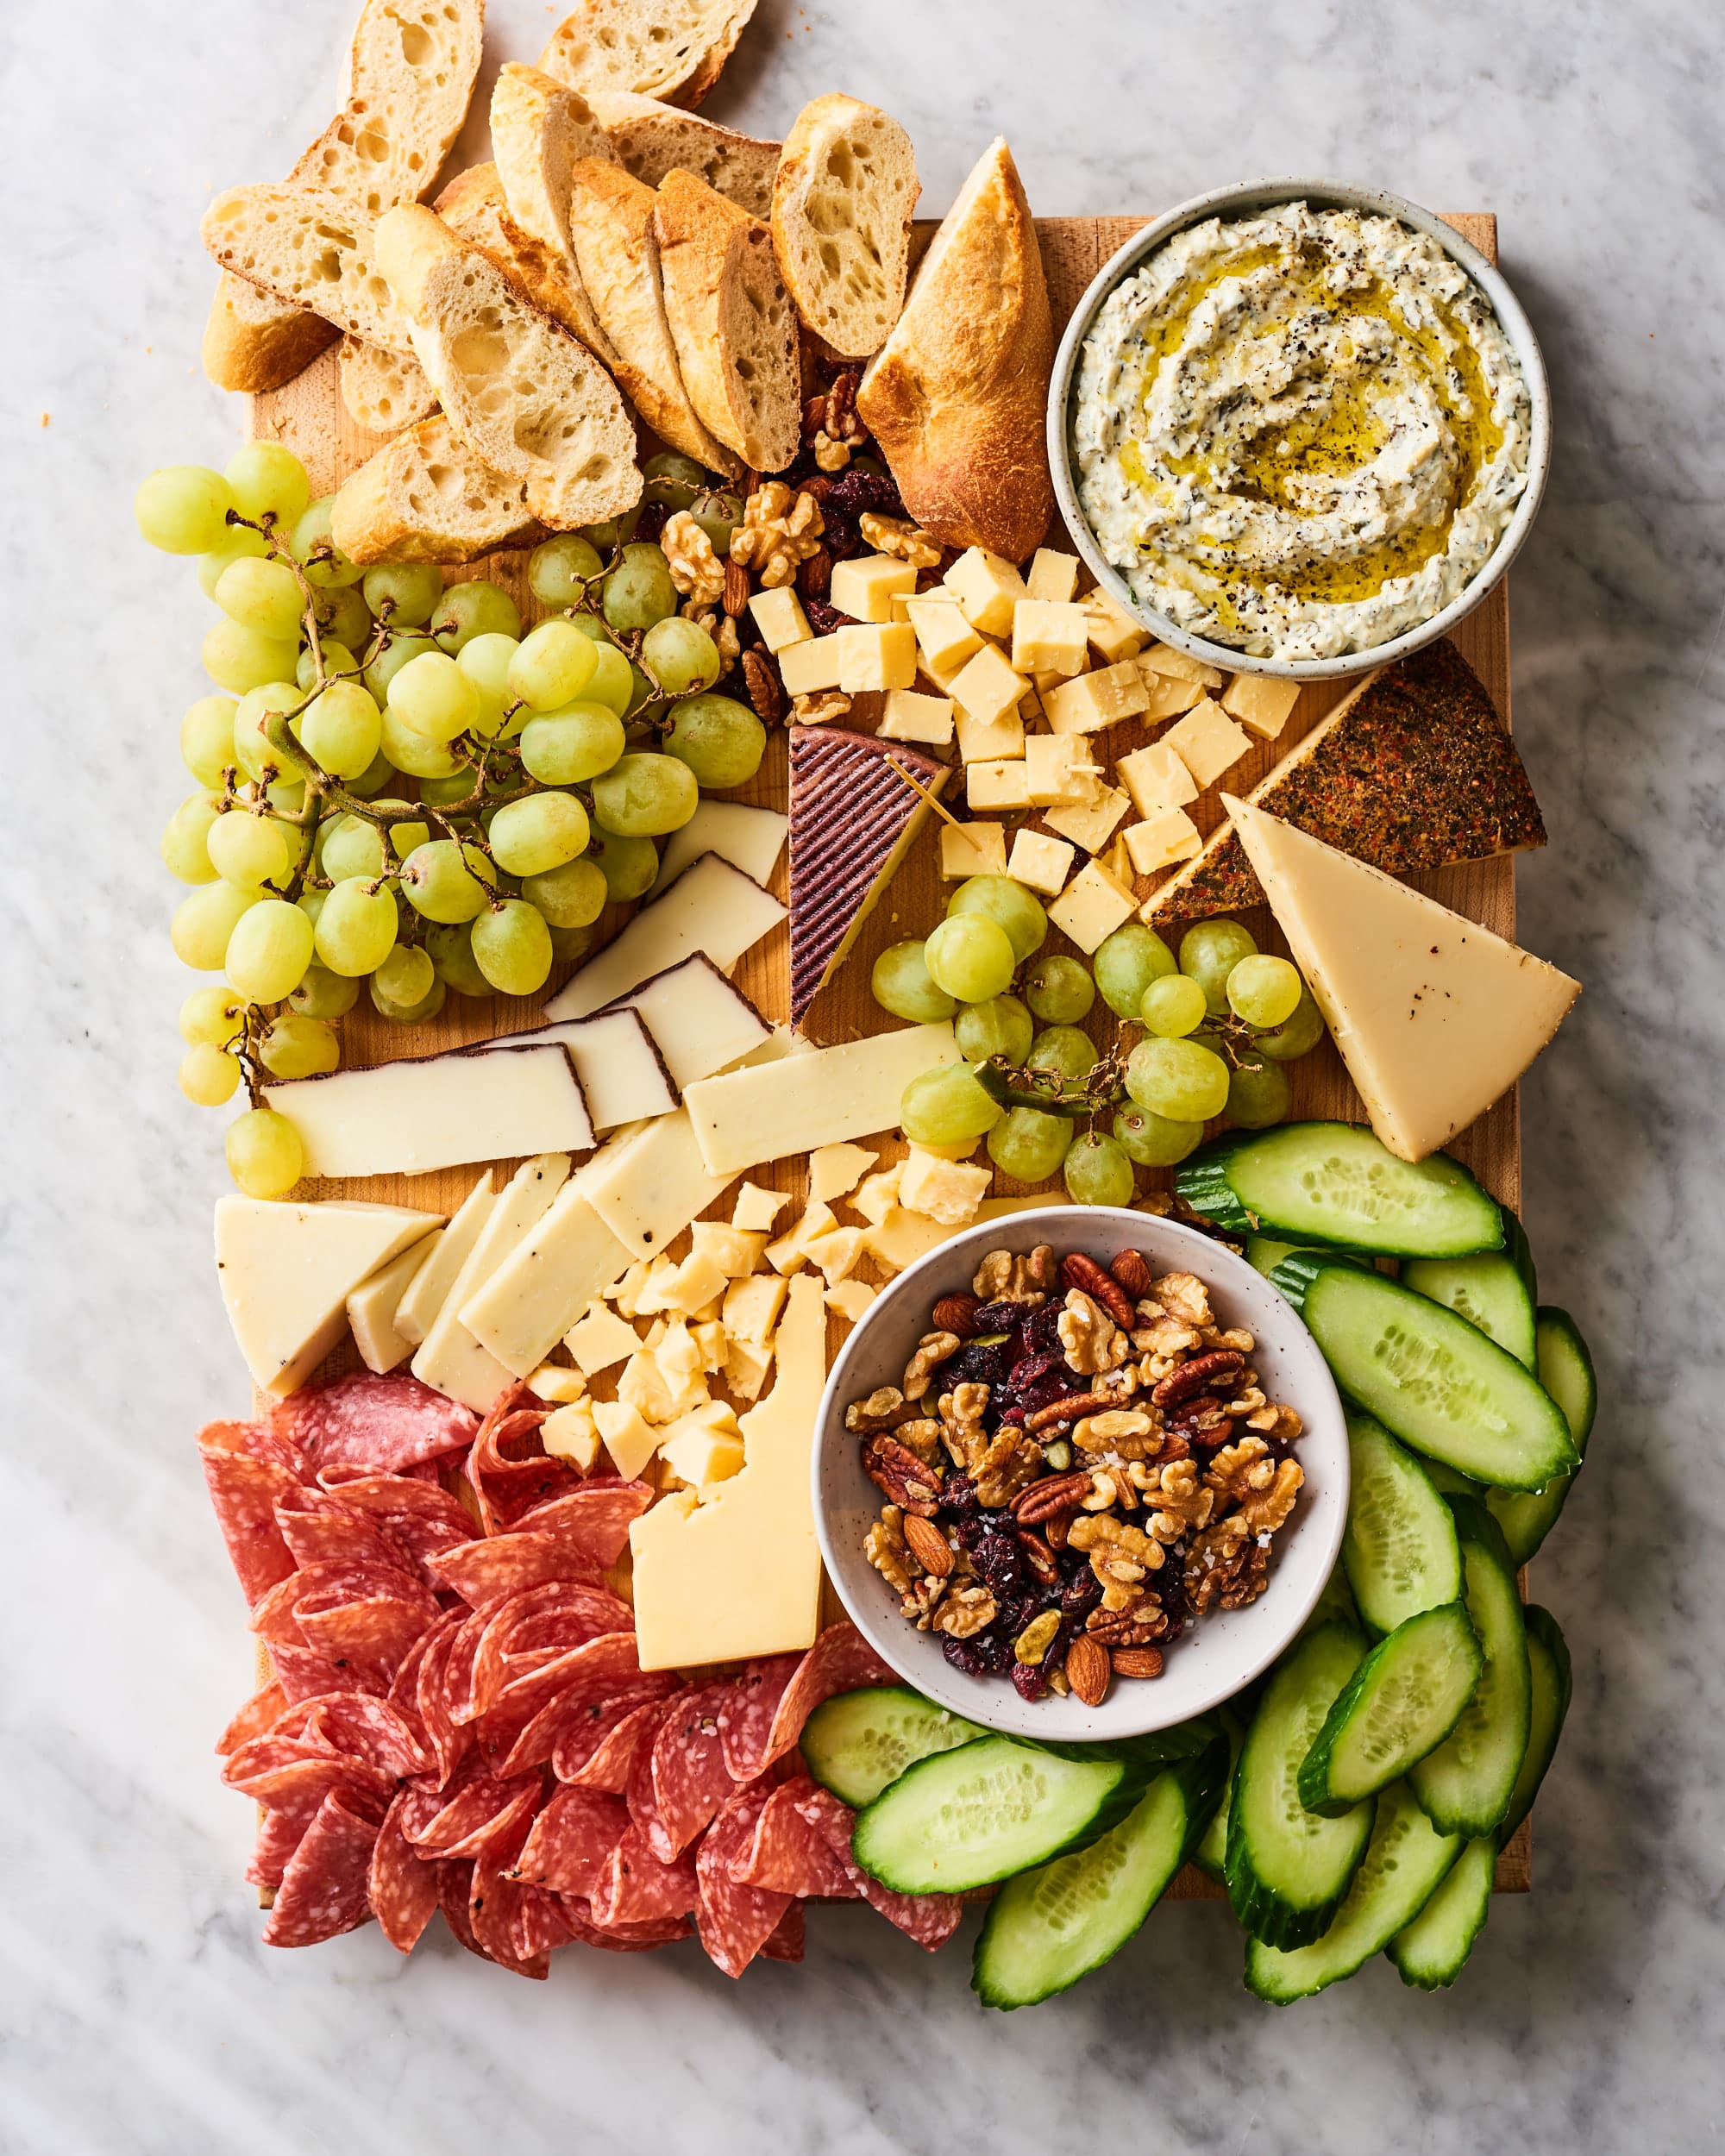 https://cdn.apartmenttherapy.info/image/upload/v1575320620/k/Photo/Lifestyle/2019-12-The-Ultimate-Costco-Charcuterie-Board/The-Ultimate-Costco-Charcuterie-Board_015.jpg